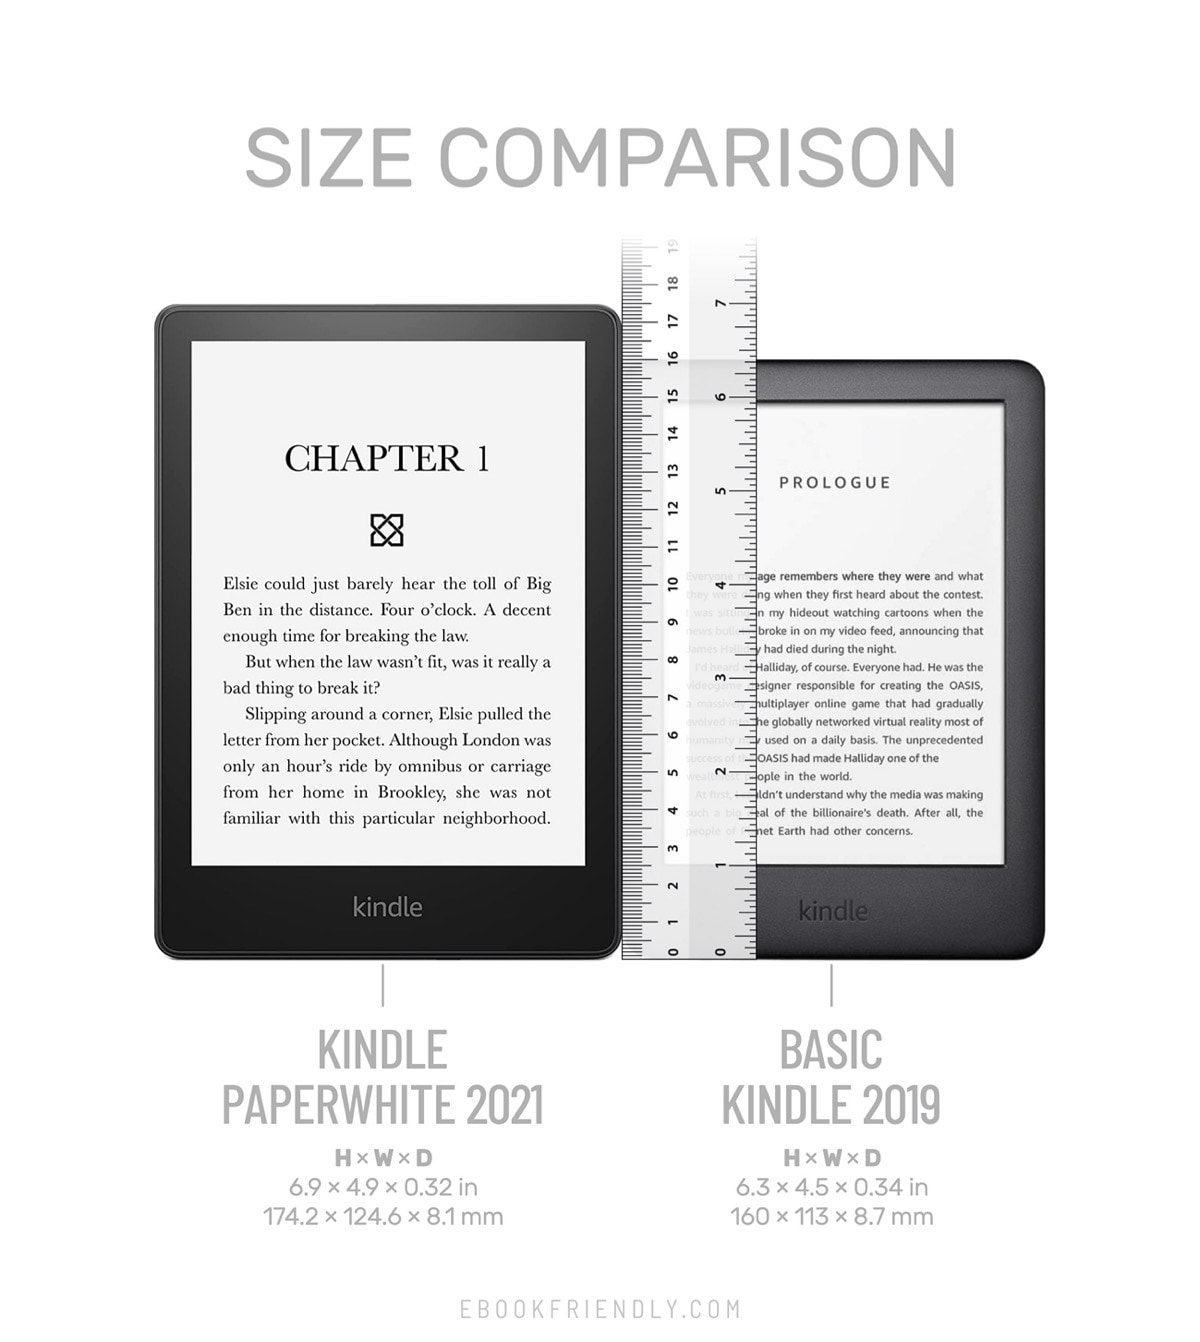 Kindle Paperwhite 6.8 2021 size compared to basic Kindle